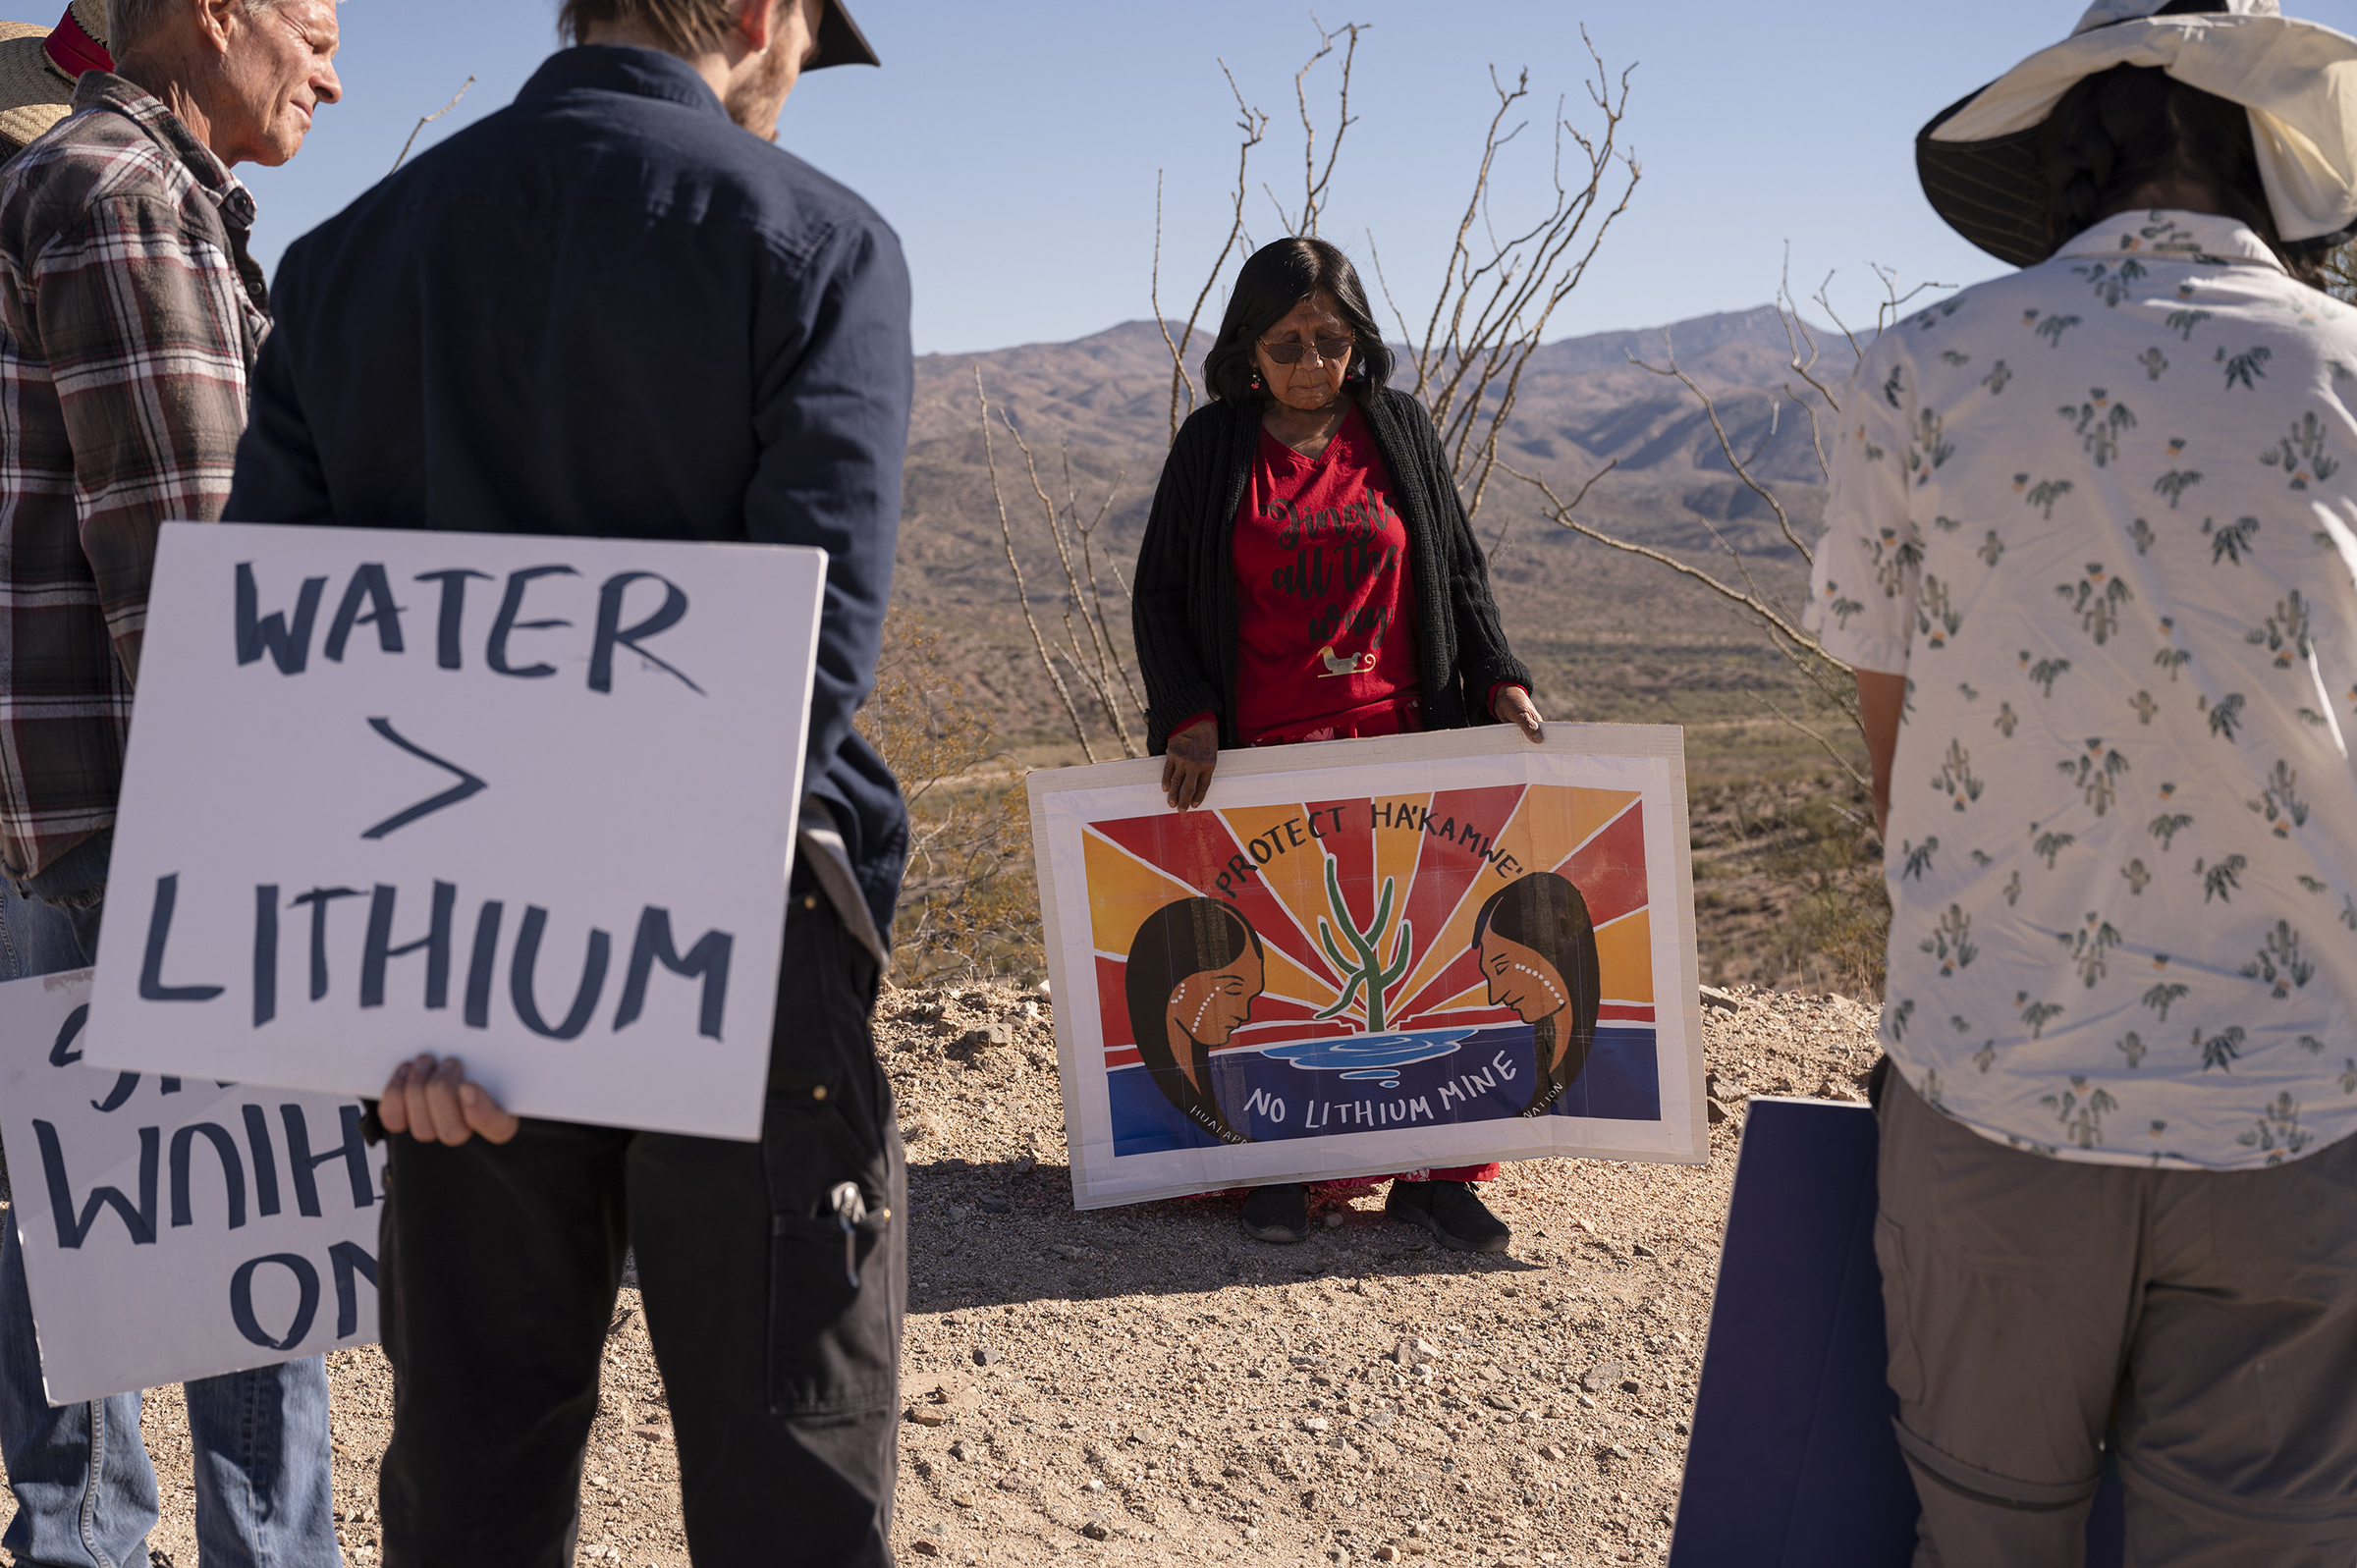 Former Hualapai tribal leader Carrie Imus holds a sign as demonstrators walk though the desert during a rally against the Hawkstone Mining Big Sandy Lithium Project in Wikieup, Ariz., on Dec. 4, 2021. Demonstrators believe that the mine poses a threat to the water supply during an ongoing severe drought. (Bridget Bennett—Bloomberg/Getty Images)